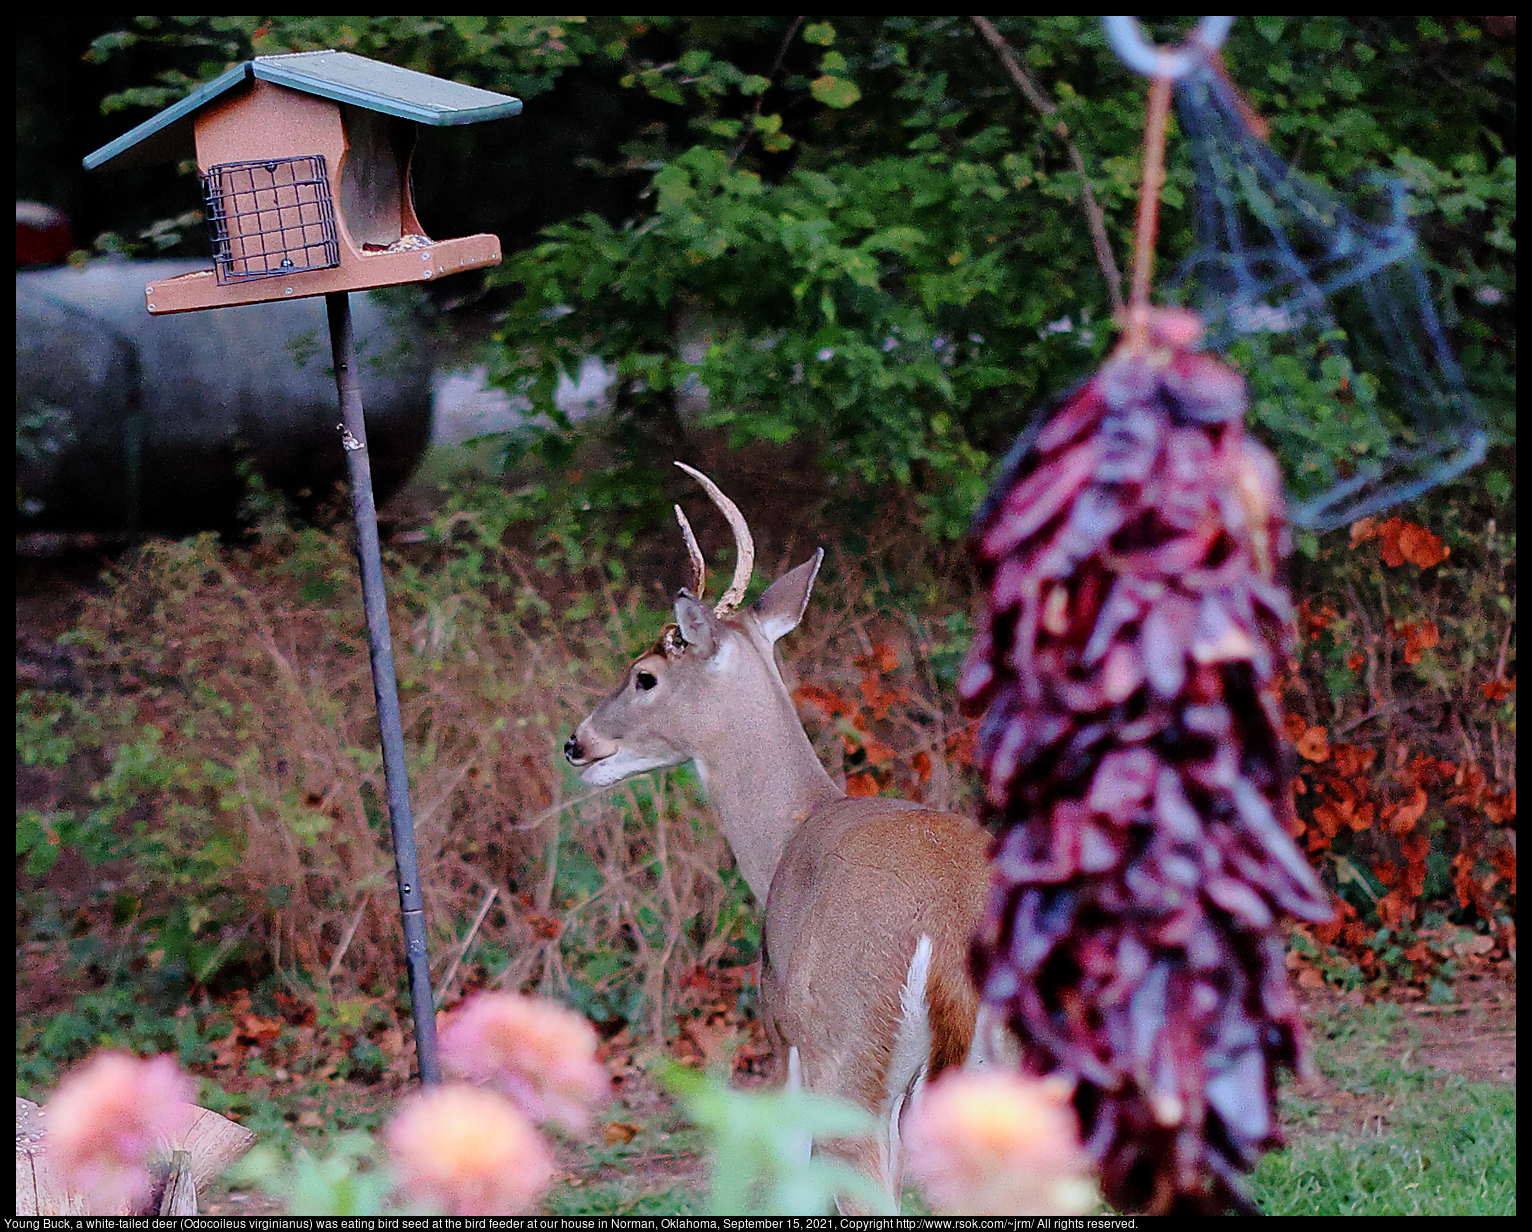 Young Buck, a white-tailed deer (Odocoileus virginianus) was eating bird seed at the bird feeder at our house in Norman, Oklahoma, September 15, 2021